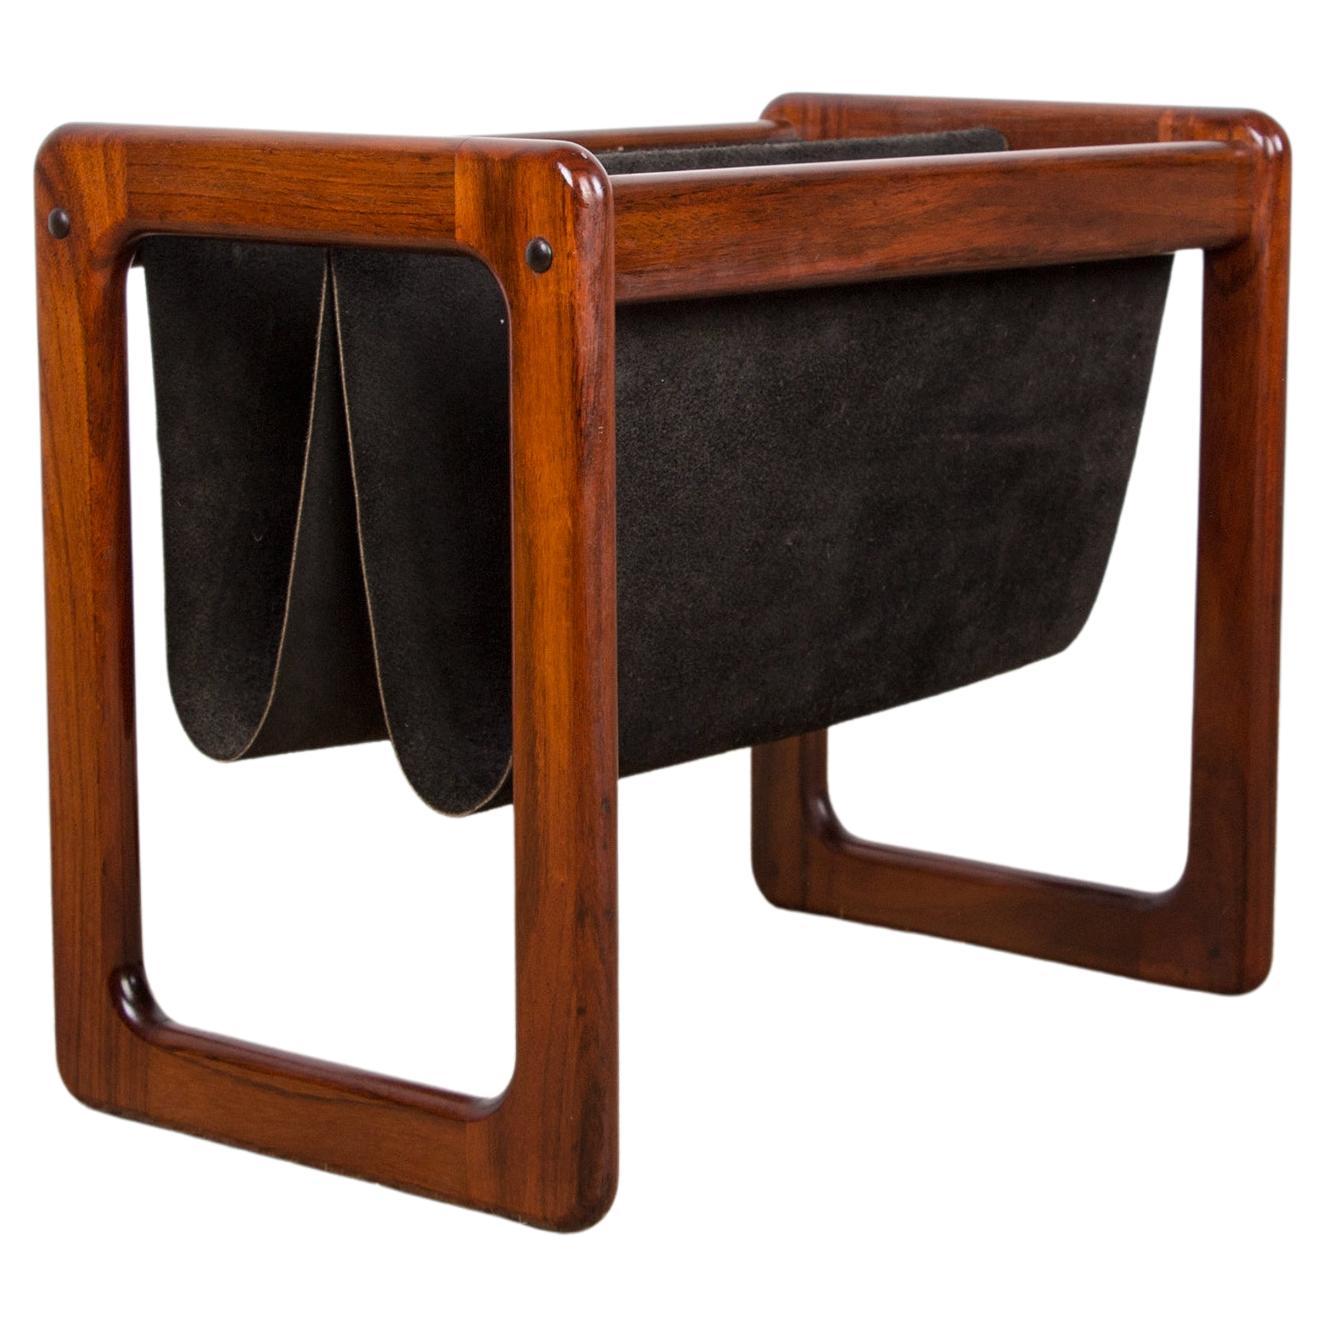 Danish Rosewood and Leather Magazine Rack by Kai Kristiansen for Odder Furniture